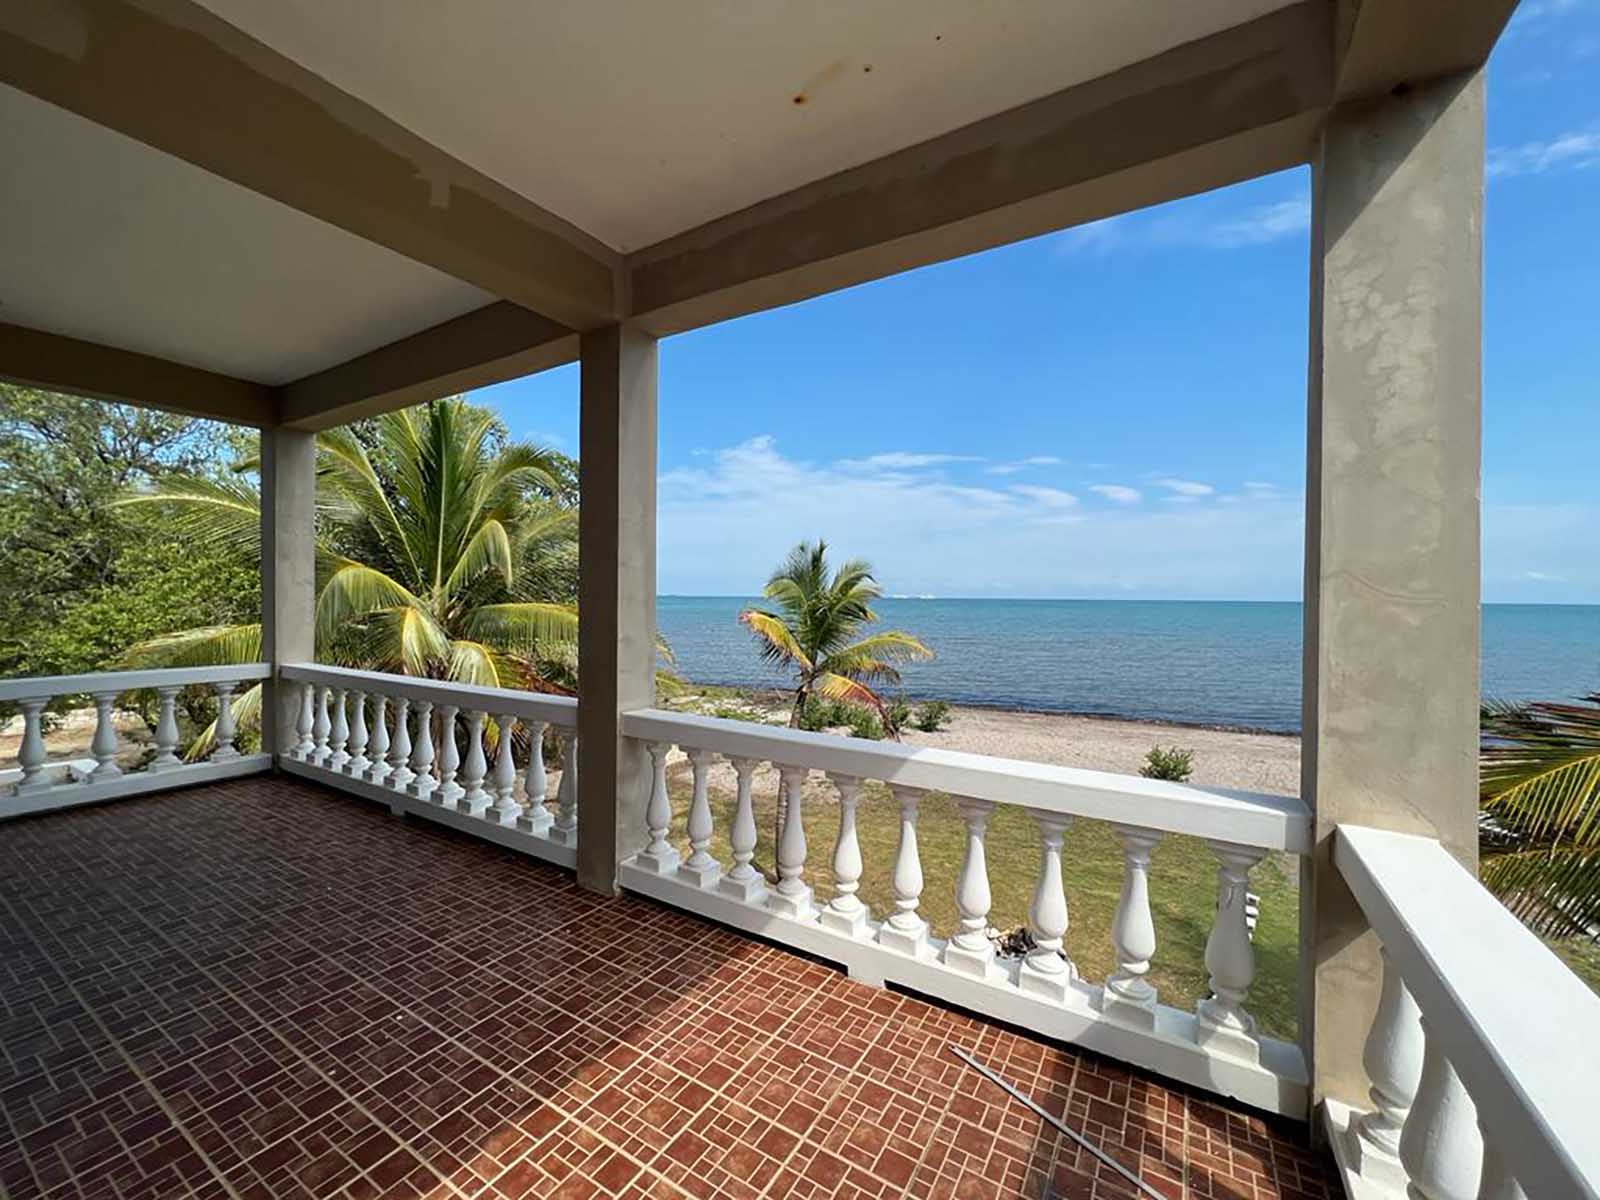 FOR-RENT: Unfurnished Seafront Apartment near Belize City.